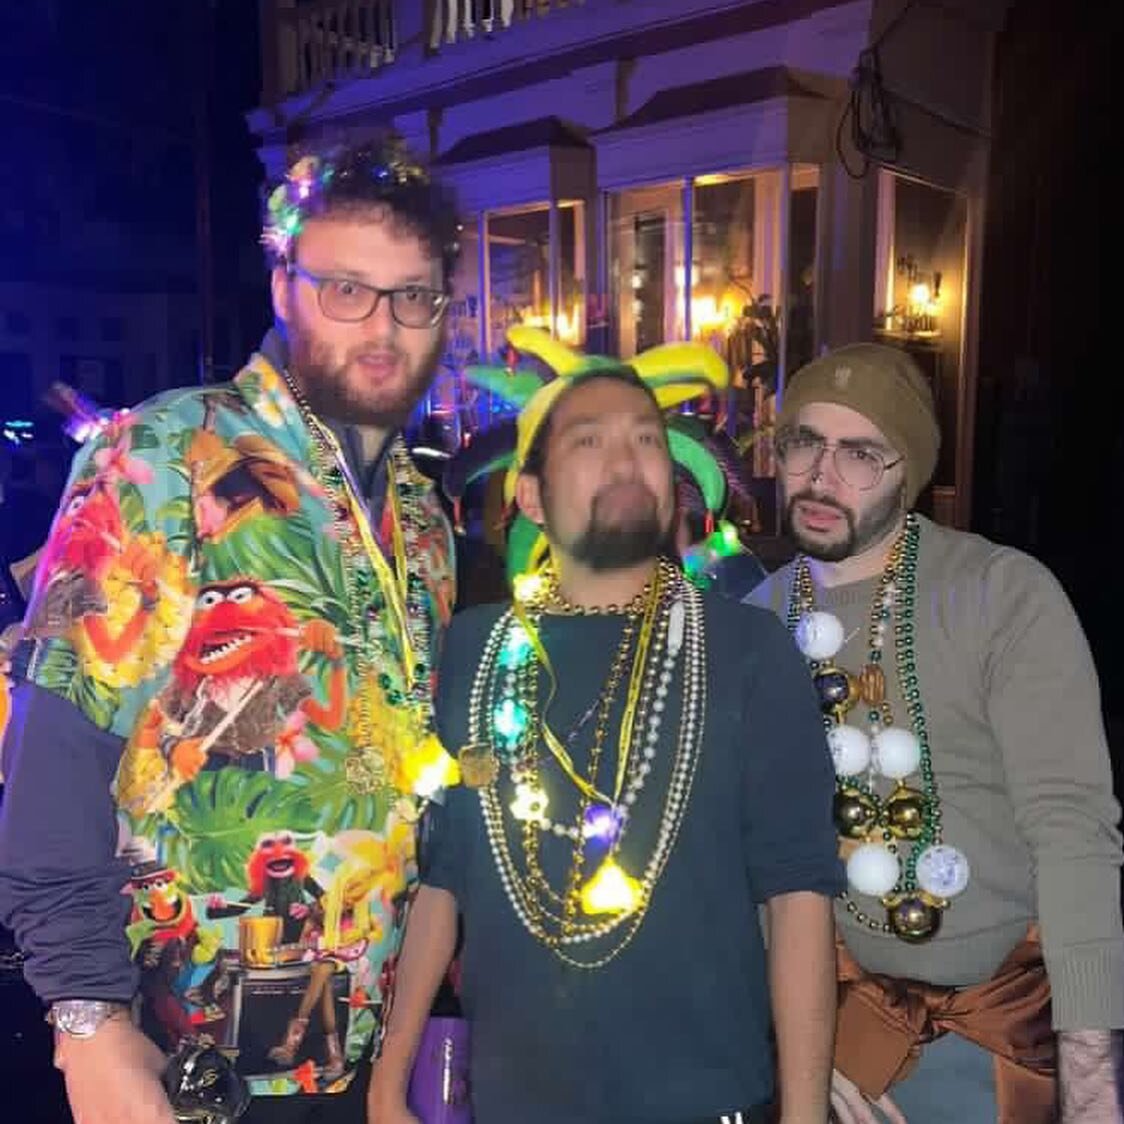 Fools of the Mississippi 🎭
Mardi Gras brought the ruckus and Nola stole my heart. 

Thank you for hosting @jewishjakers 🕺🏻 🐸 

Good luck in Scotland @collazo_concepts 🧙🏽&zwj;♂️

#nola #louisiana #popeyes #poboys #mardigras #beads